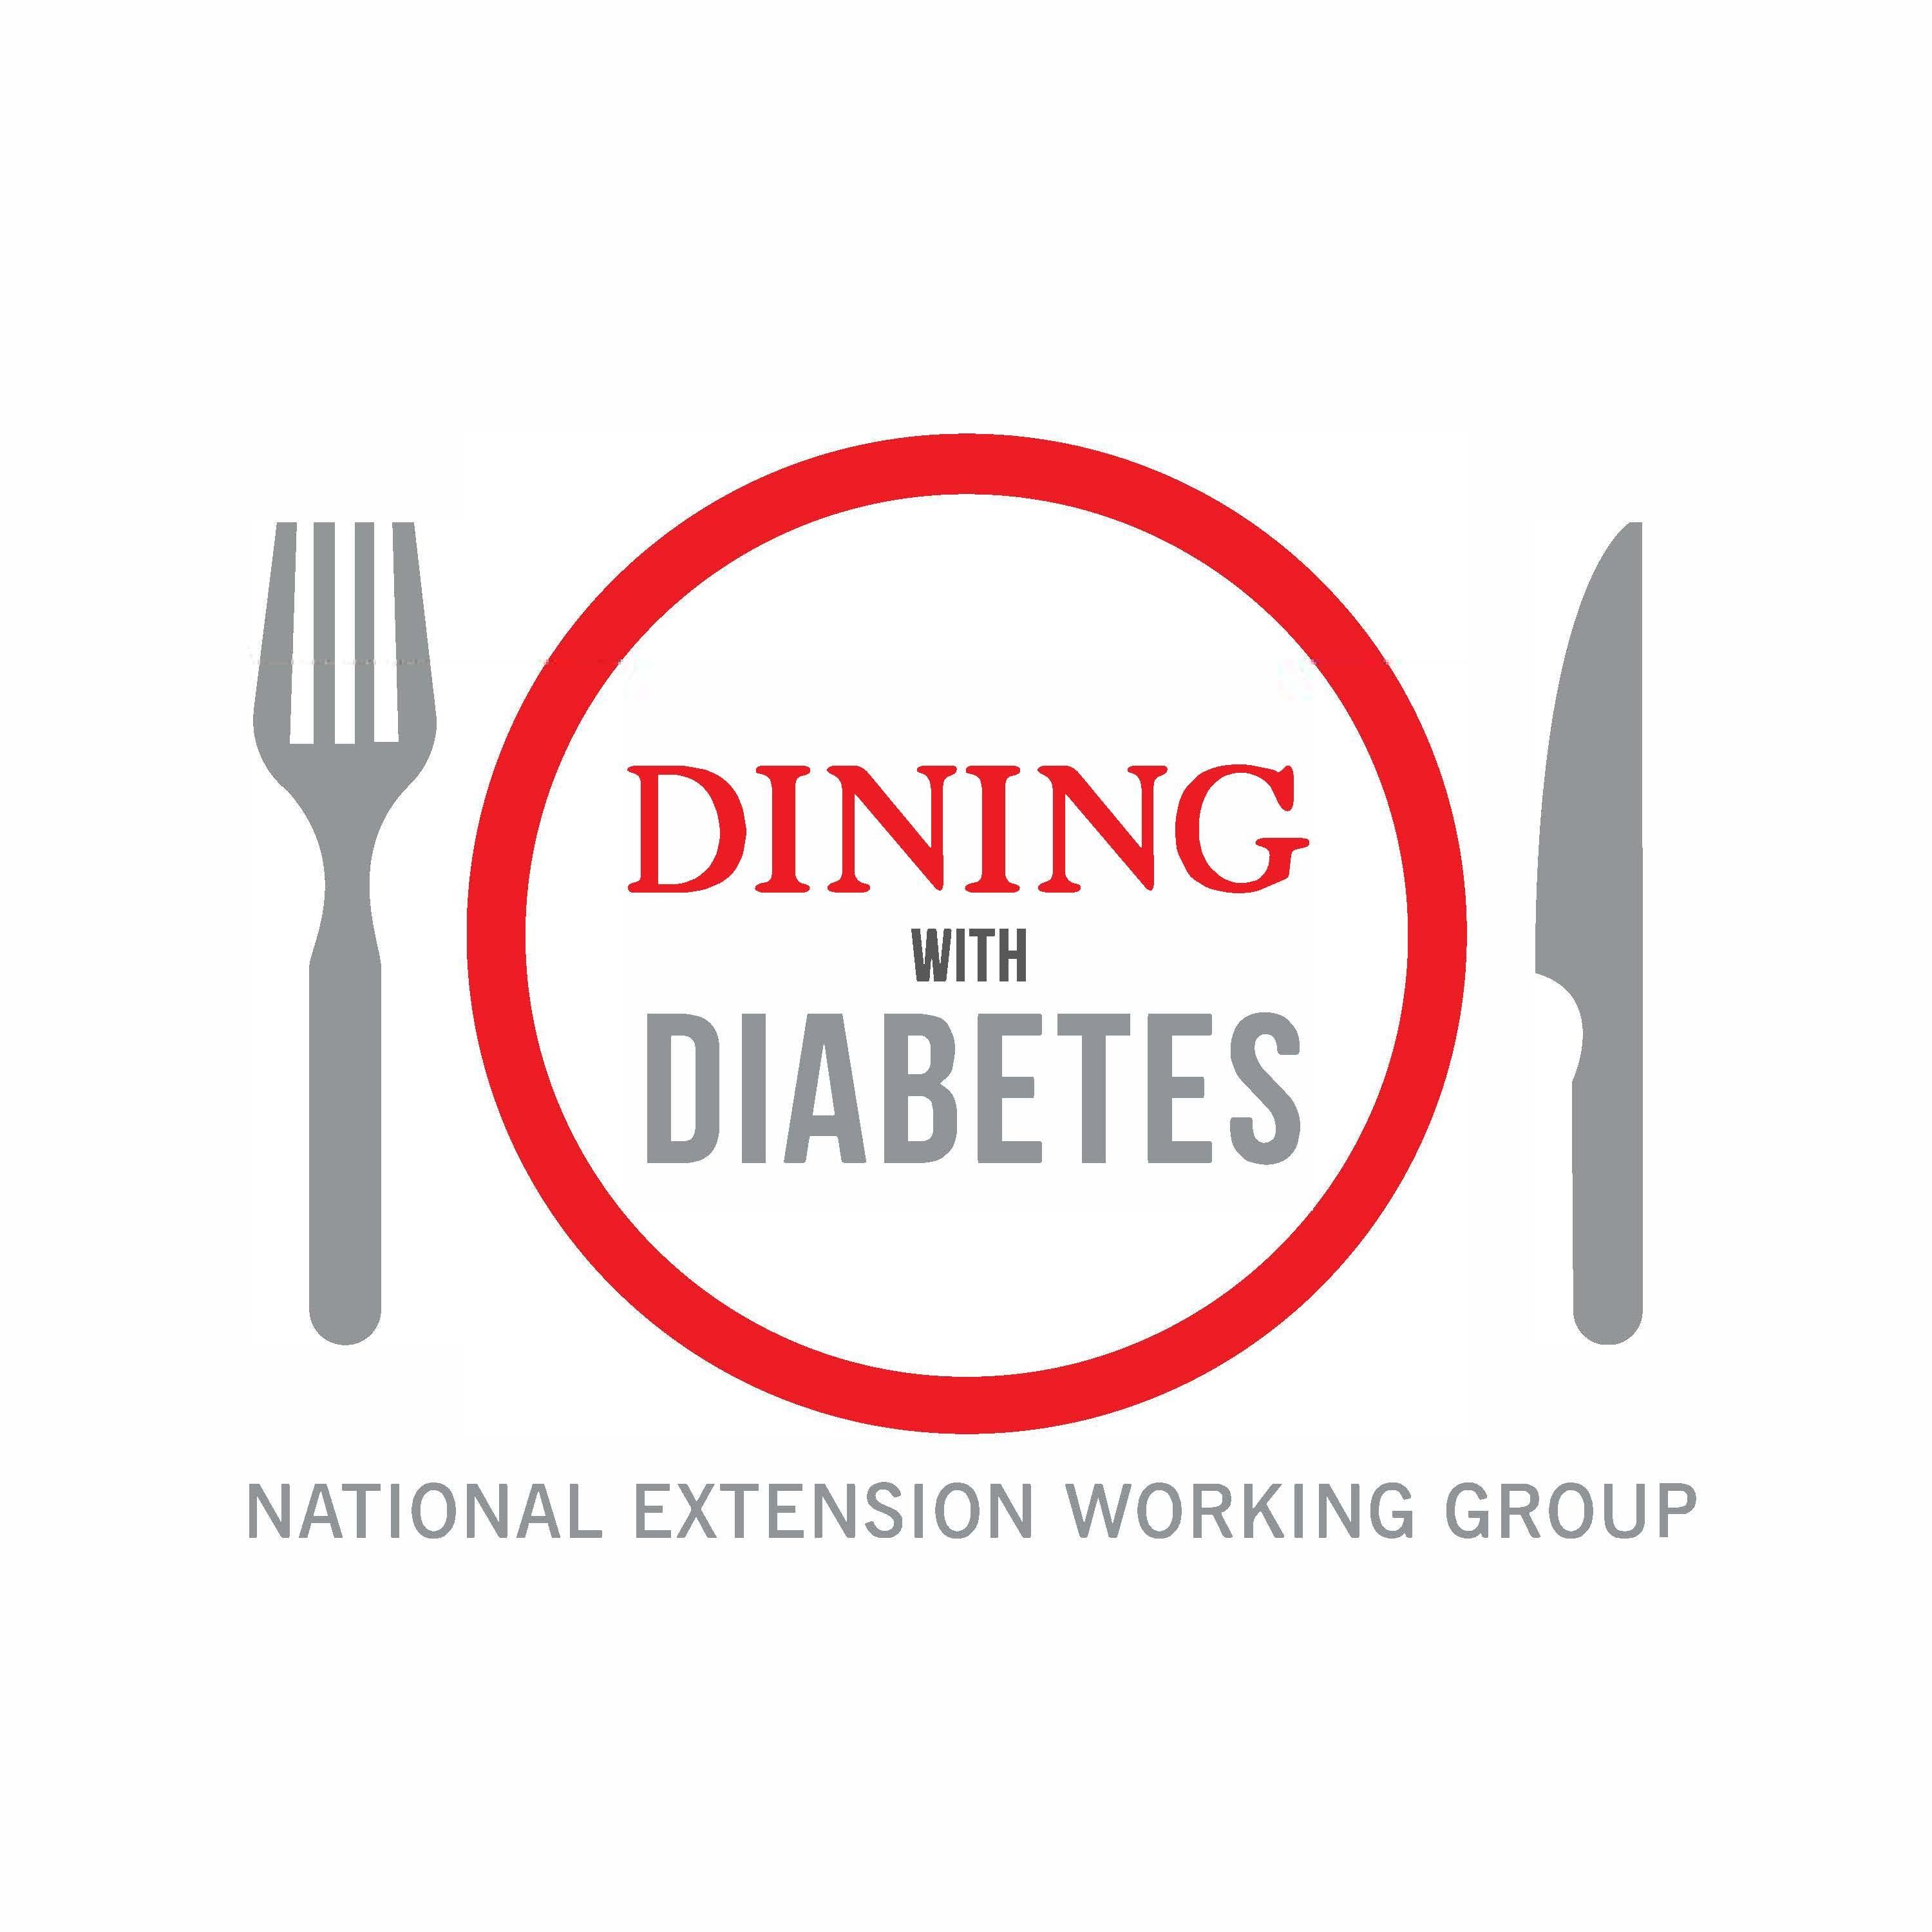 Dining With Diabetes logo